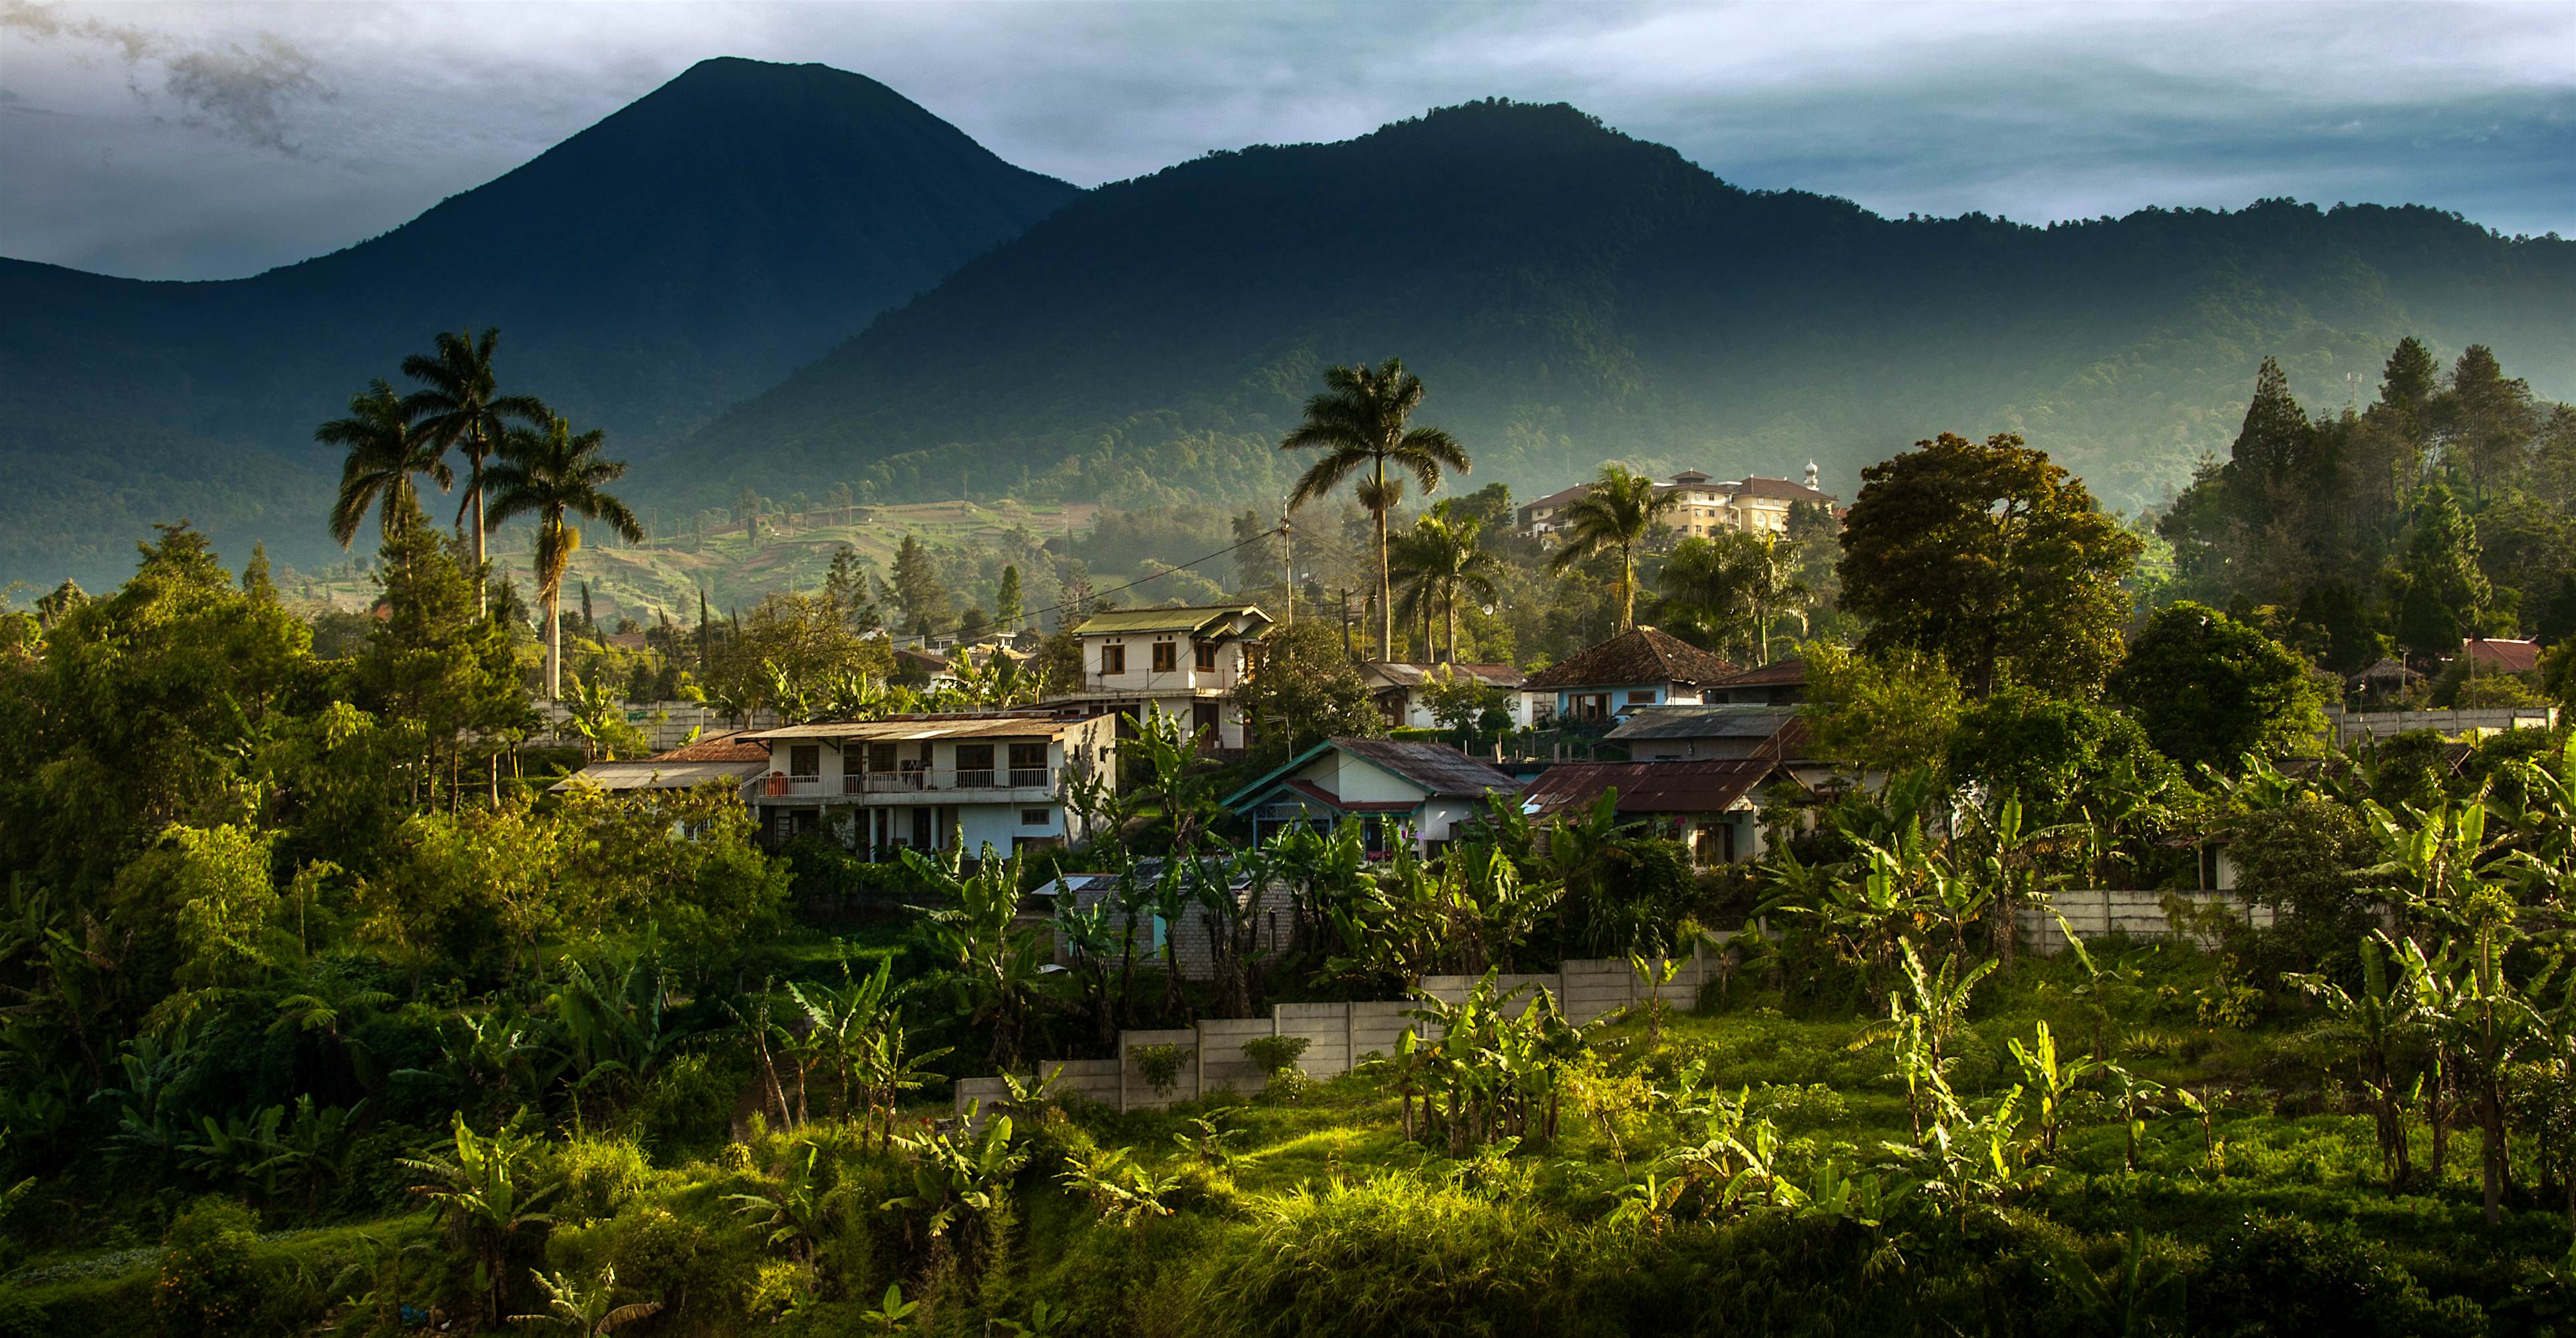 Bandung travel | Java, Indonesia - Lonely Planet